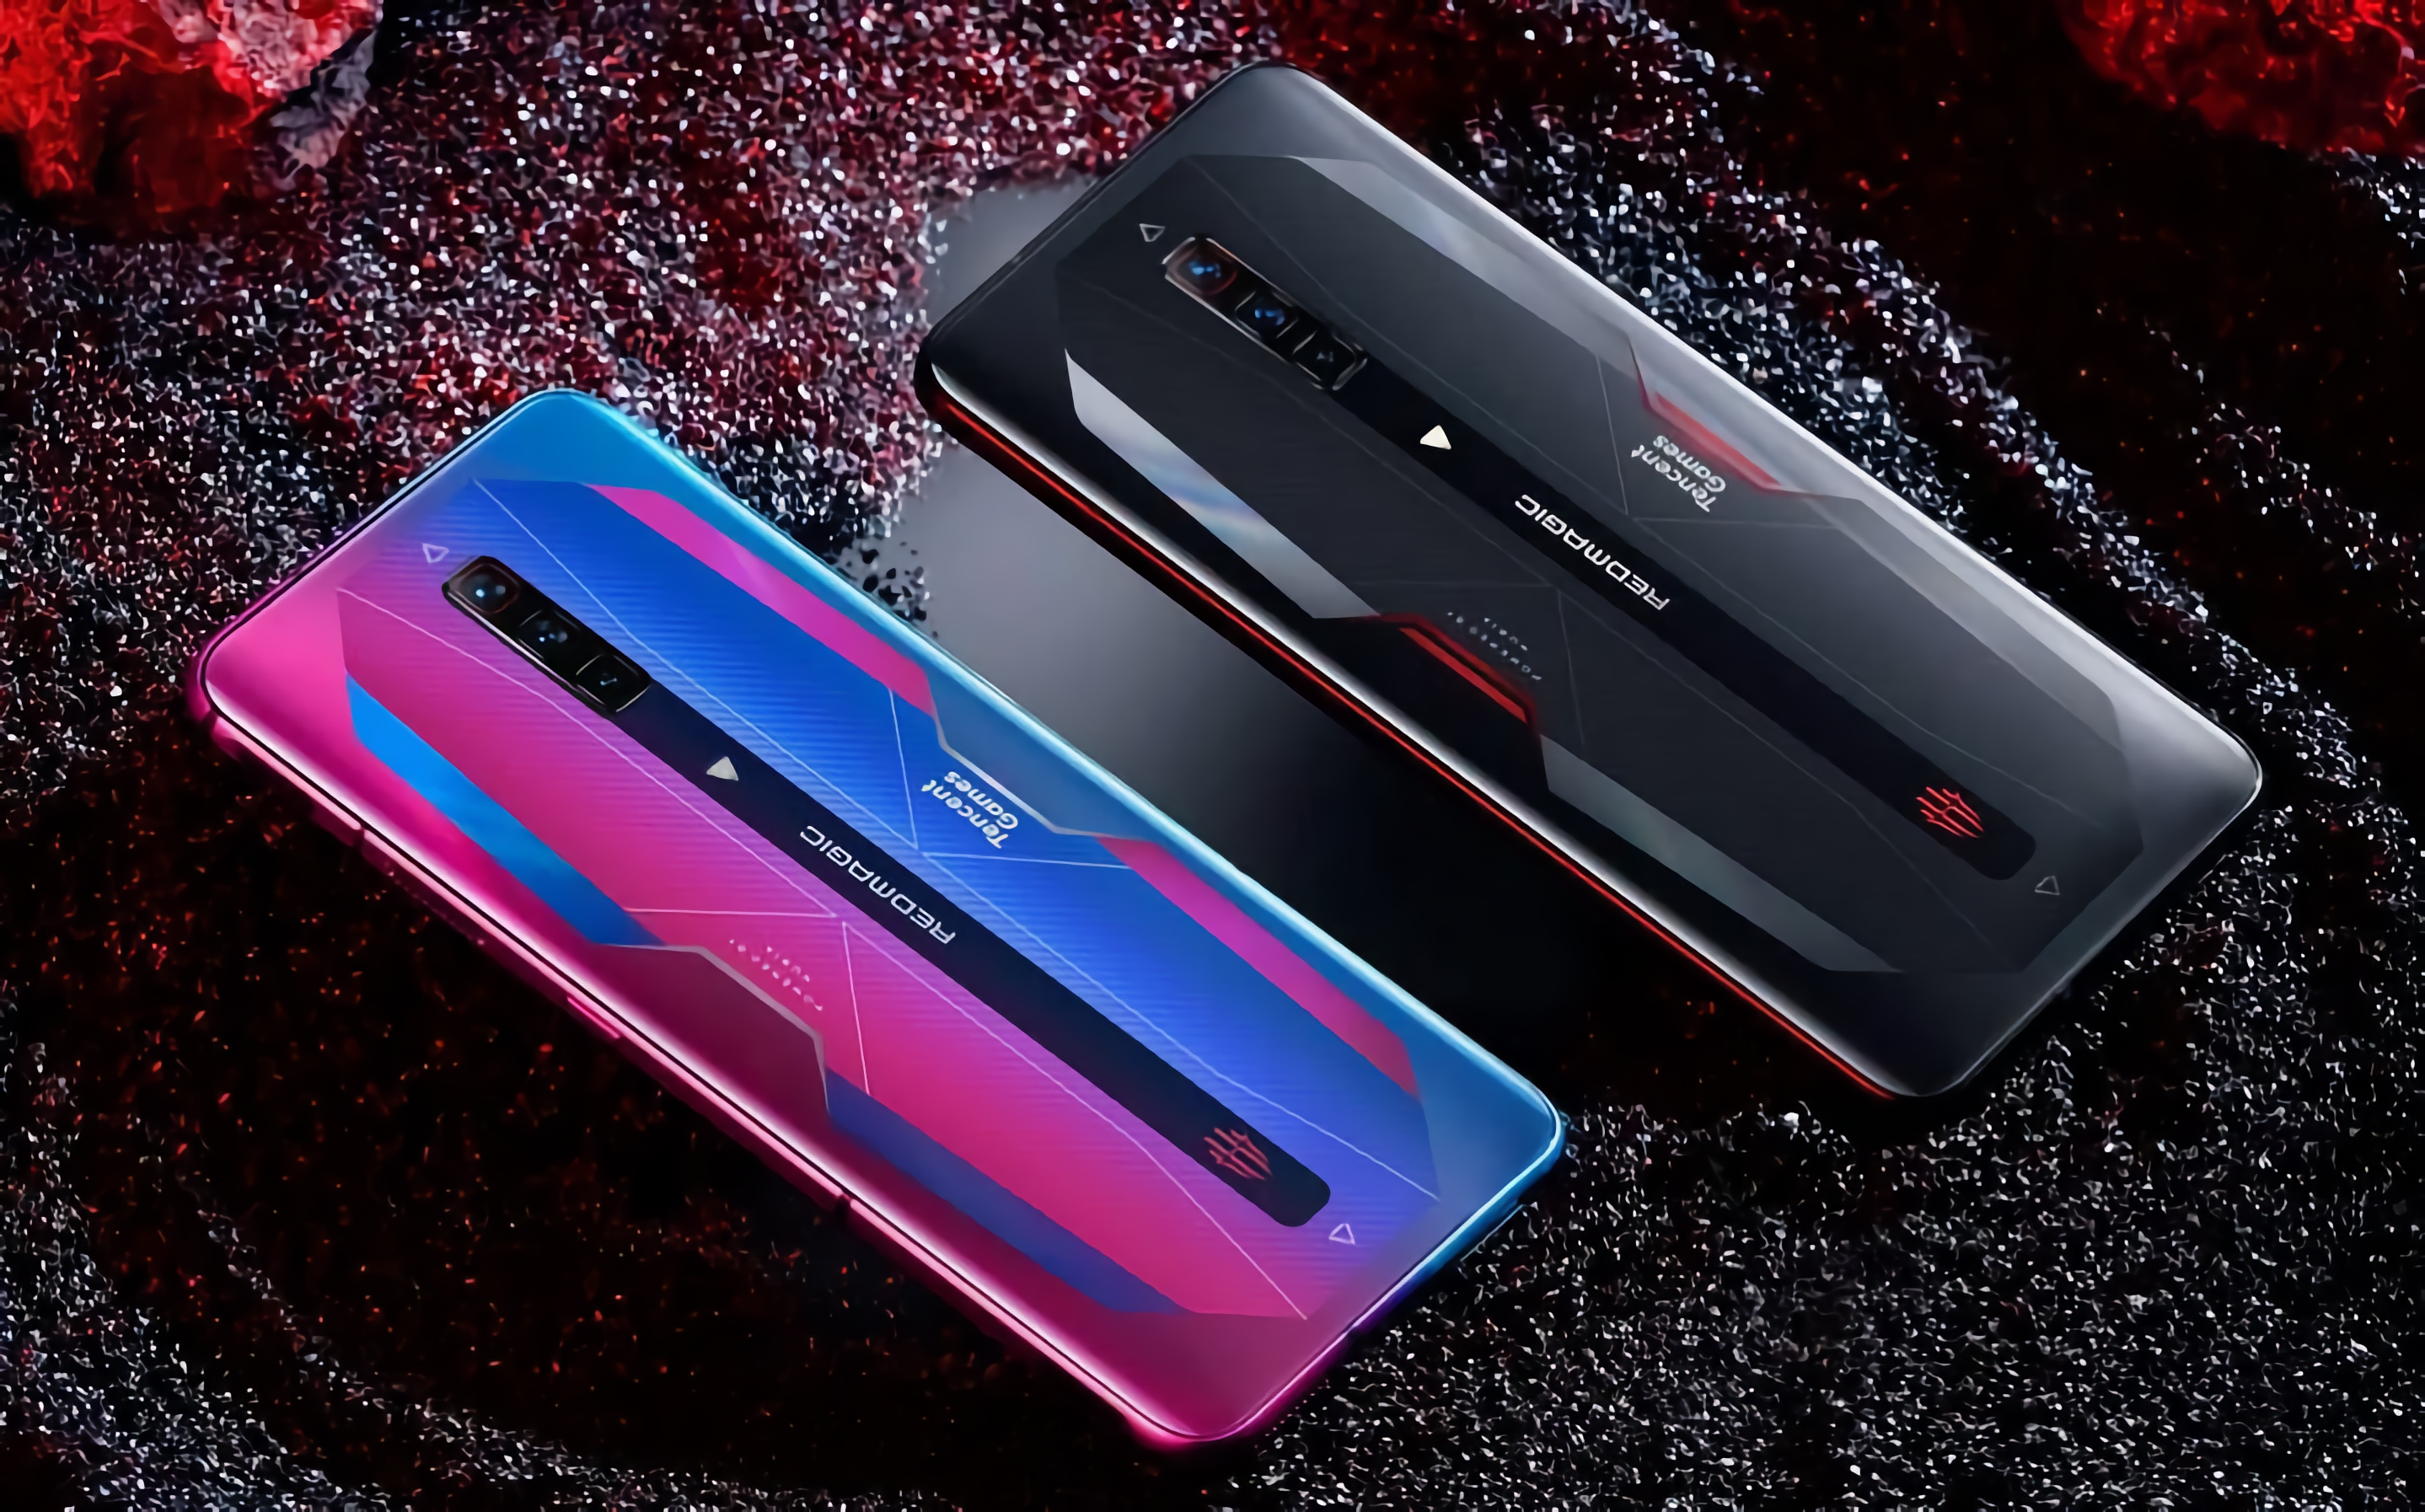 Nubia revealed the specifications and announcement date of the Red Magic 6S Pro gaming smartphone